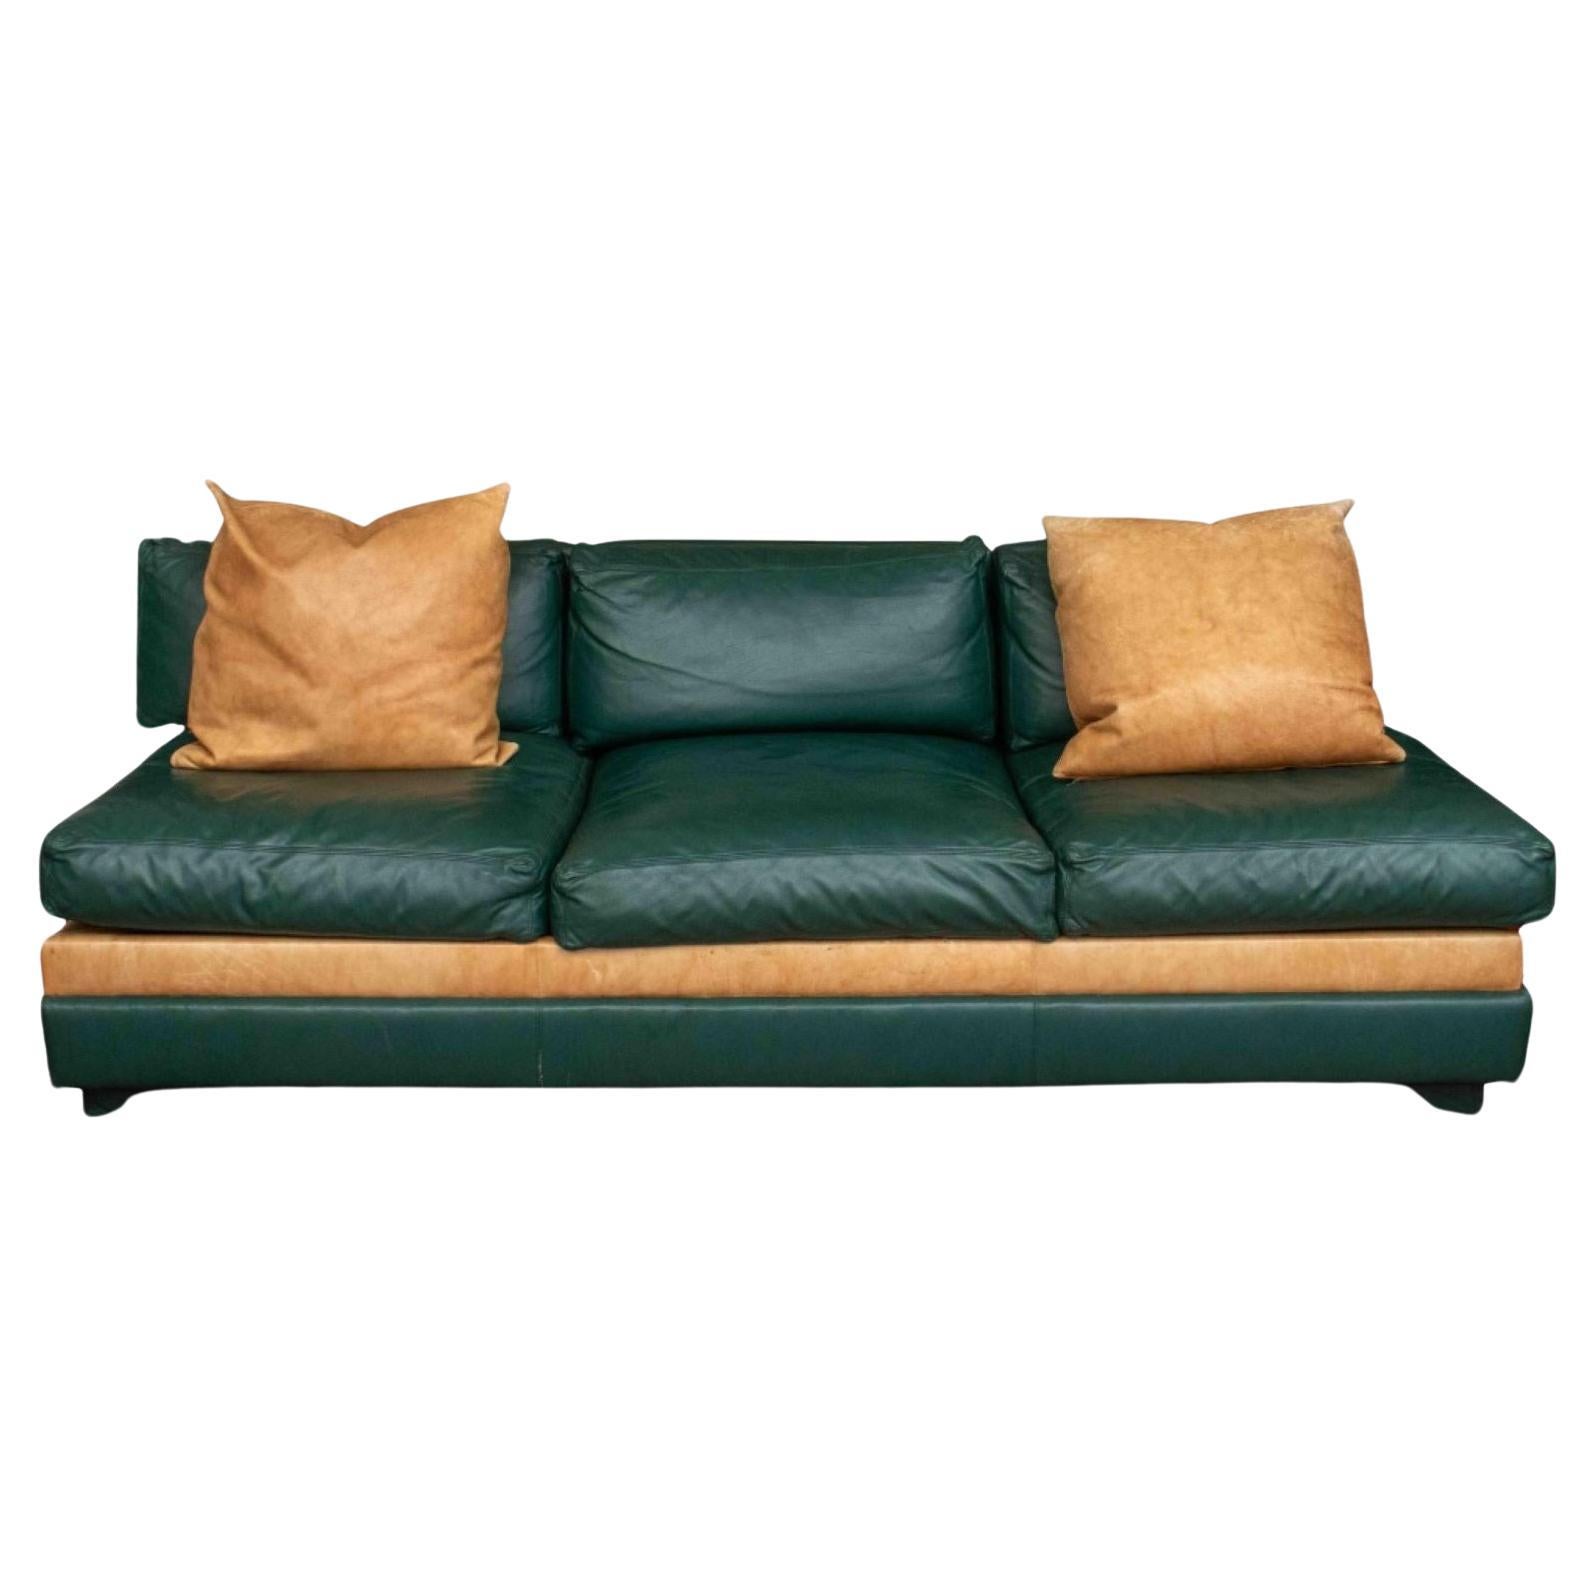 Modern Leather Sleeper Sectional Sofa For Sale